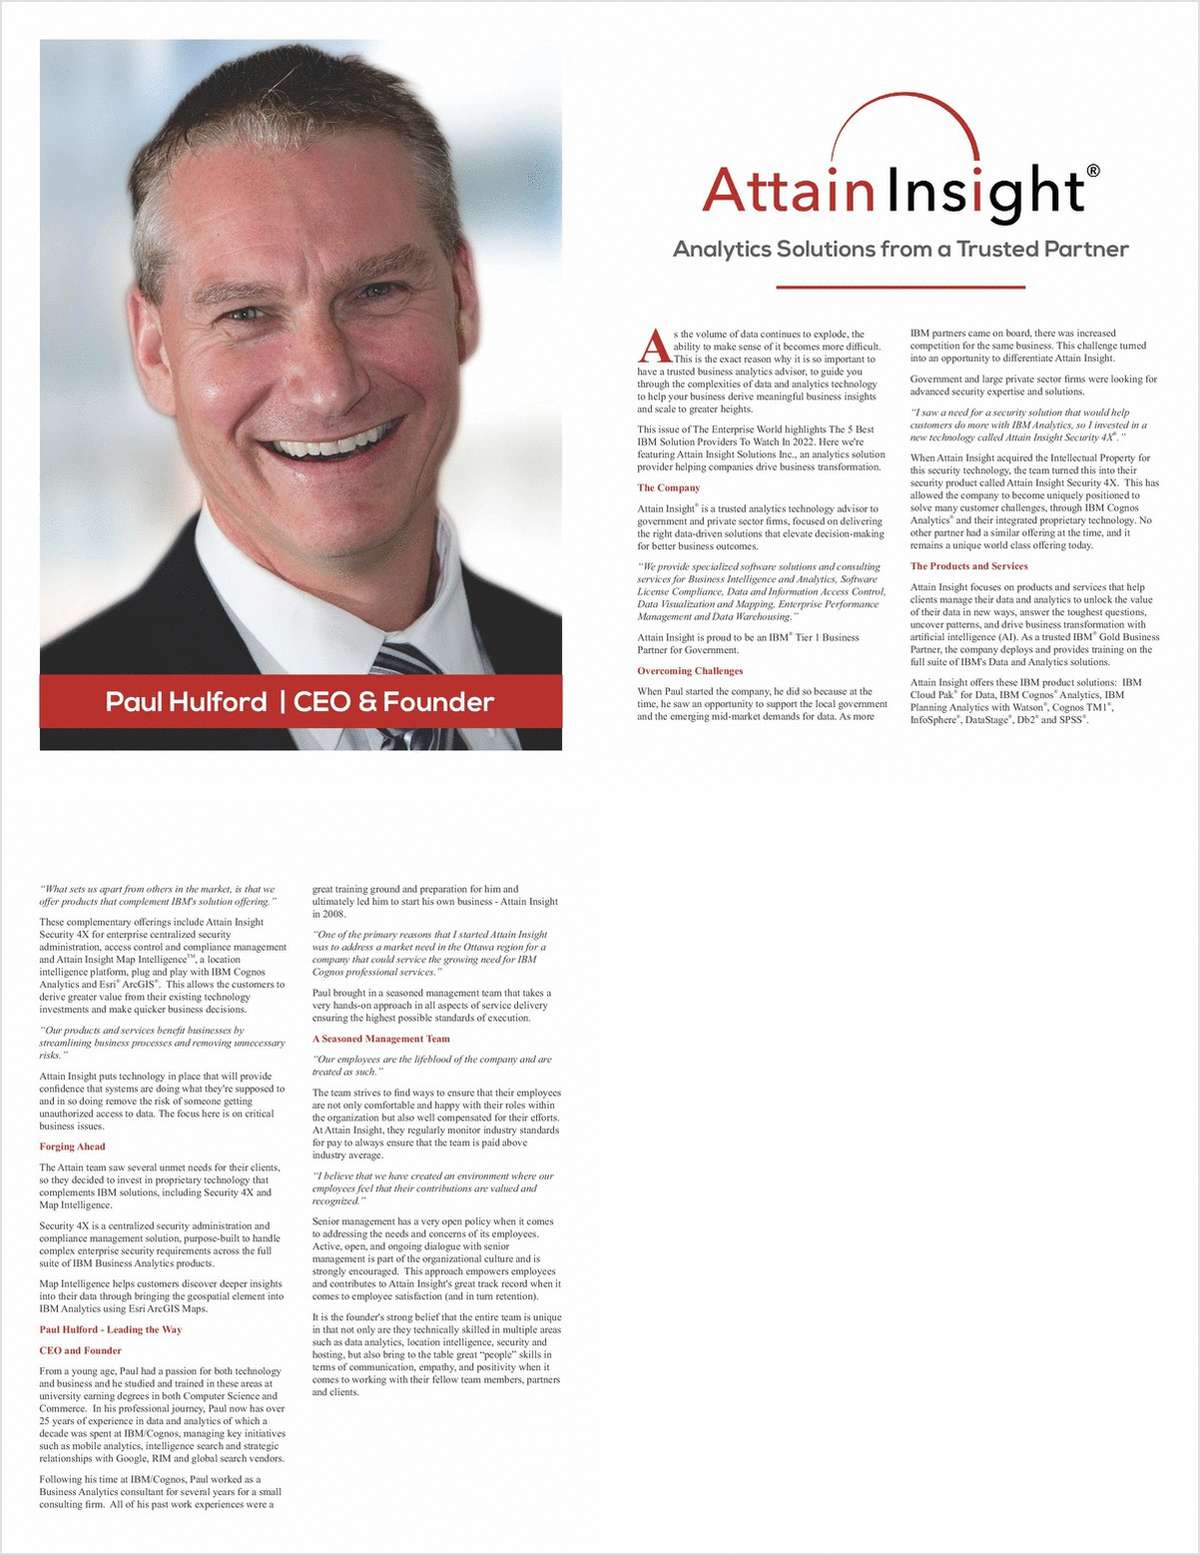 Attain Insight: Analytics Solutions from a Trusted Partner